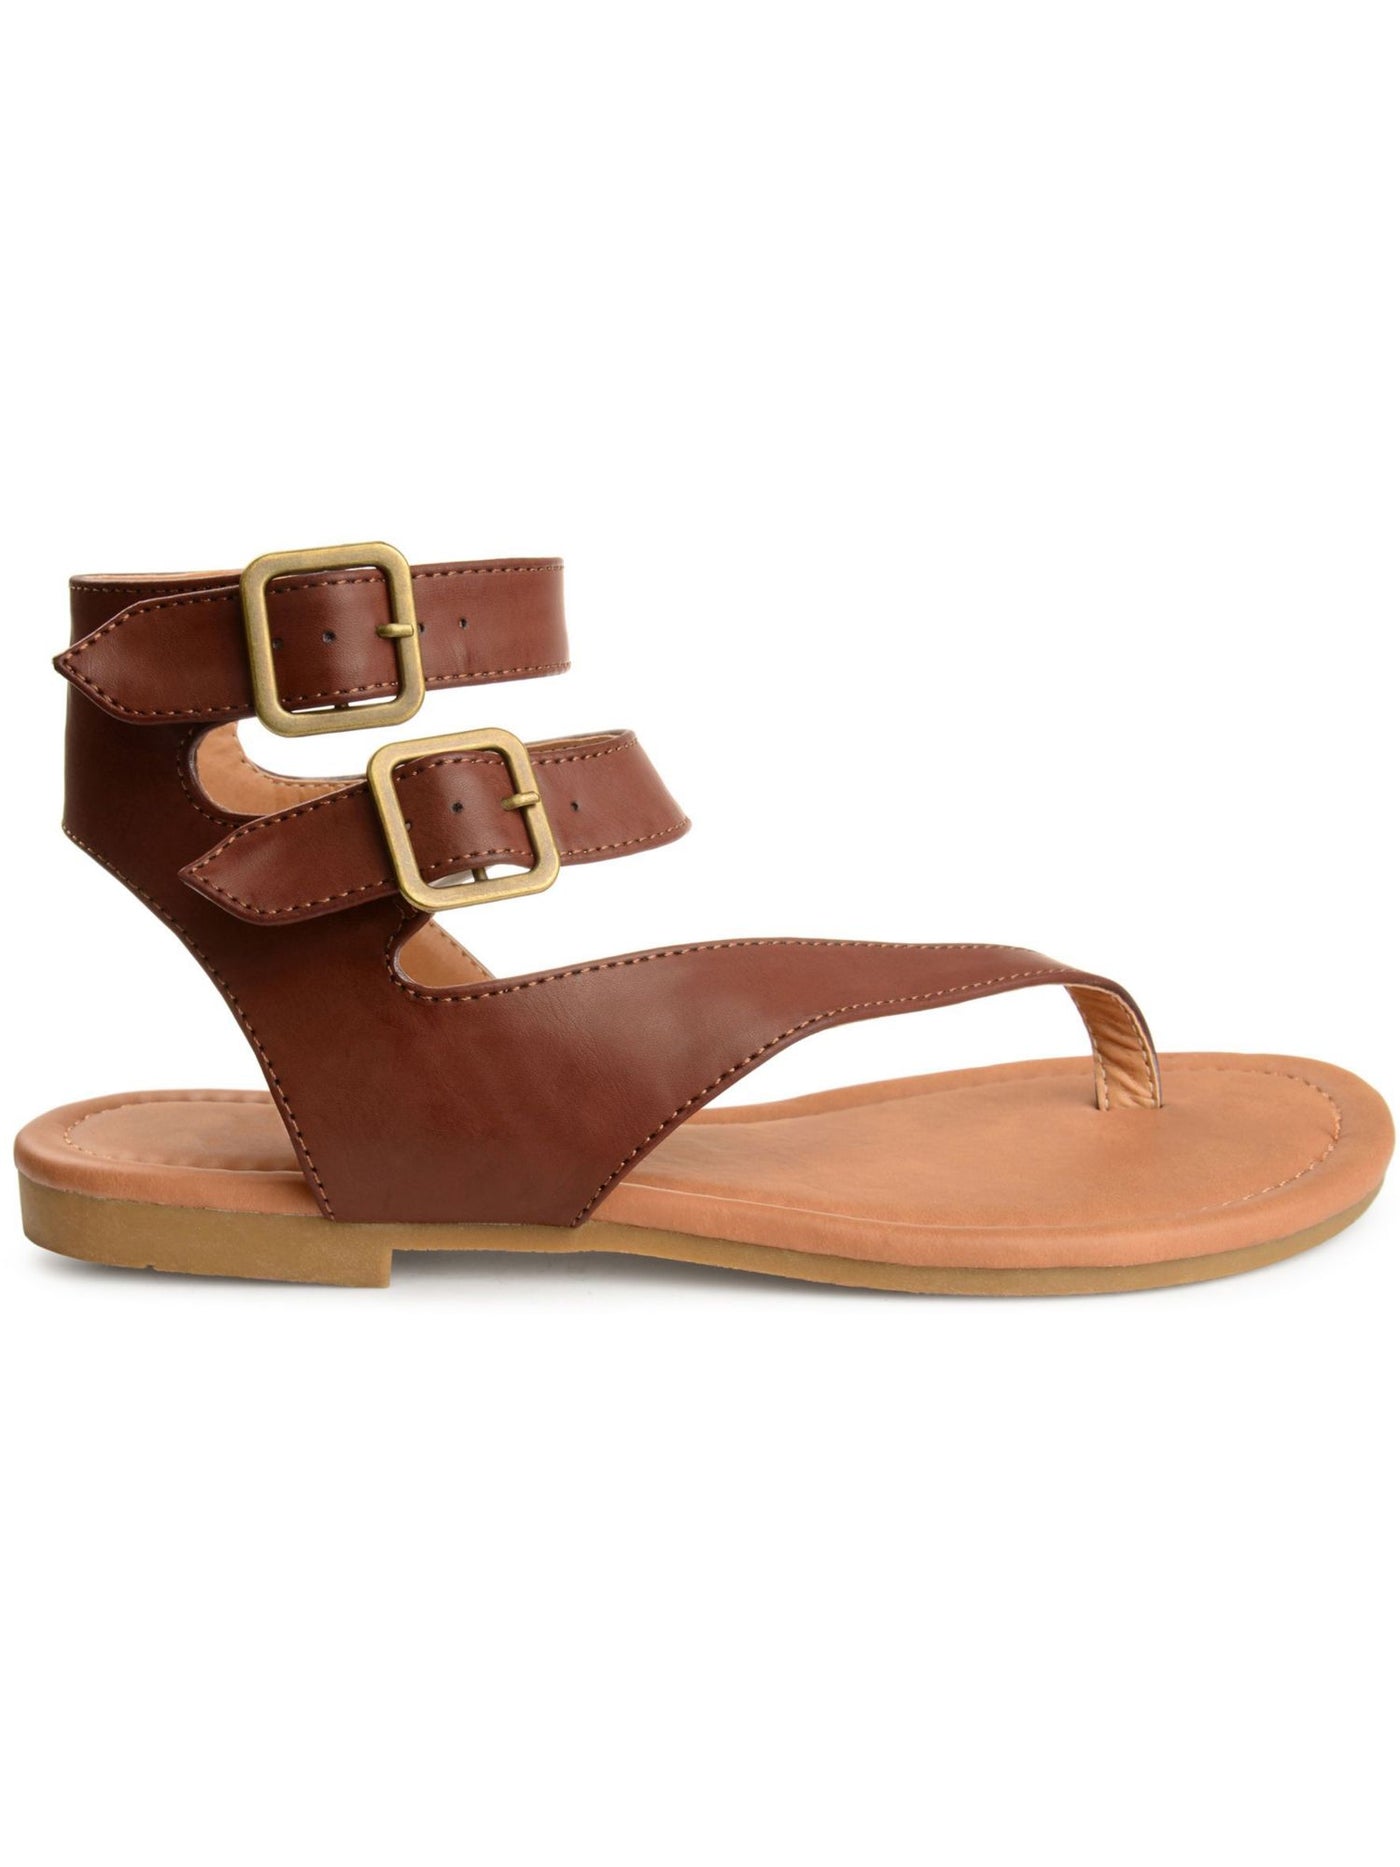 JOURNEE COLLECTION Womens Brown Padded Ankle Strap Asymmetrical Kyle Round Toe Buckle Thong Sandals Shoes 7.5